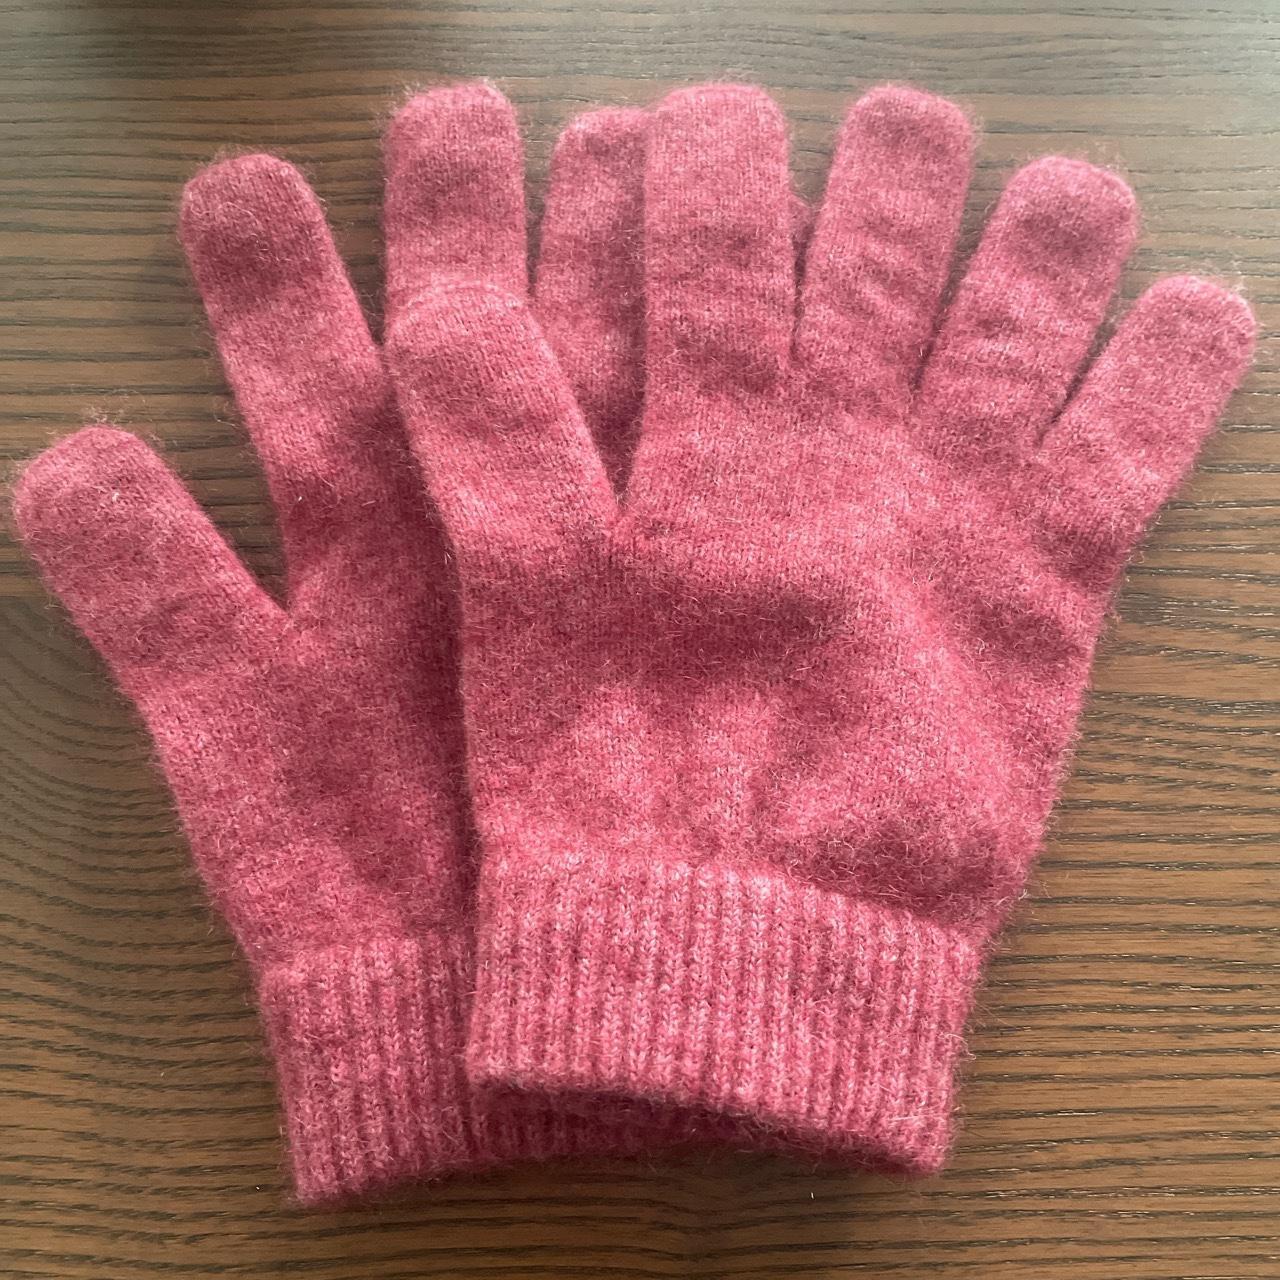 Possums merino glove in red Great condition and... - Depop